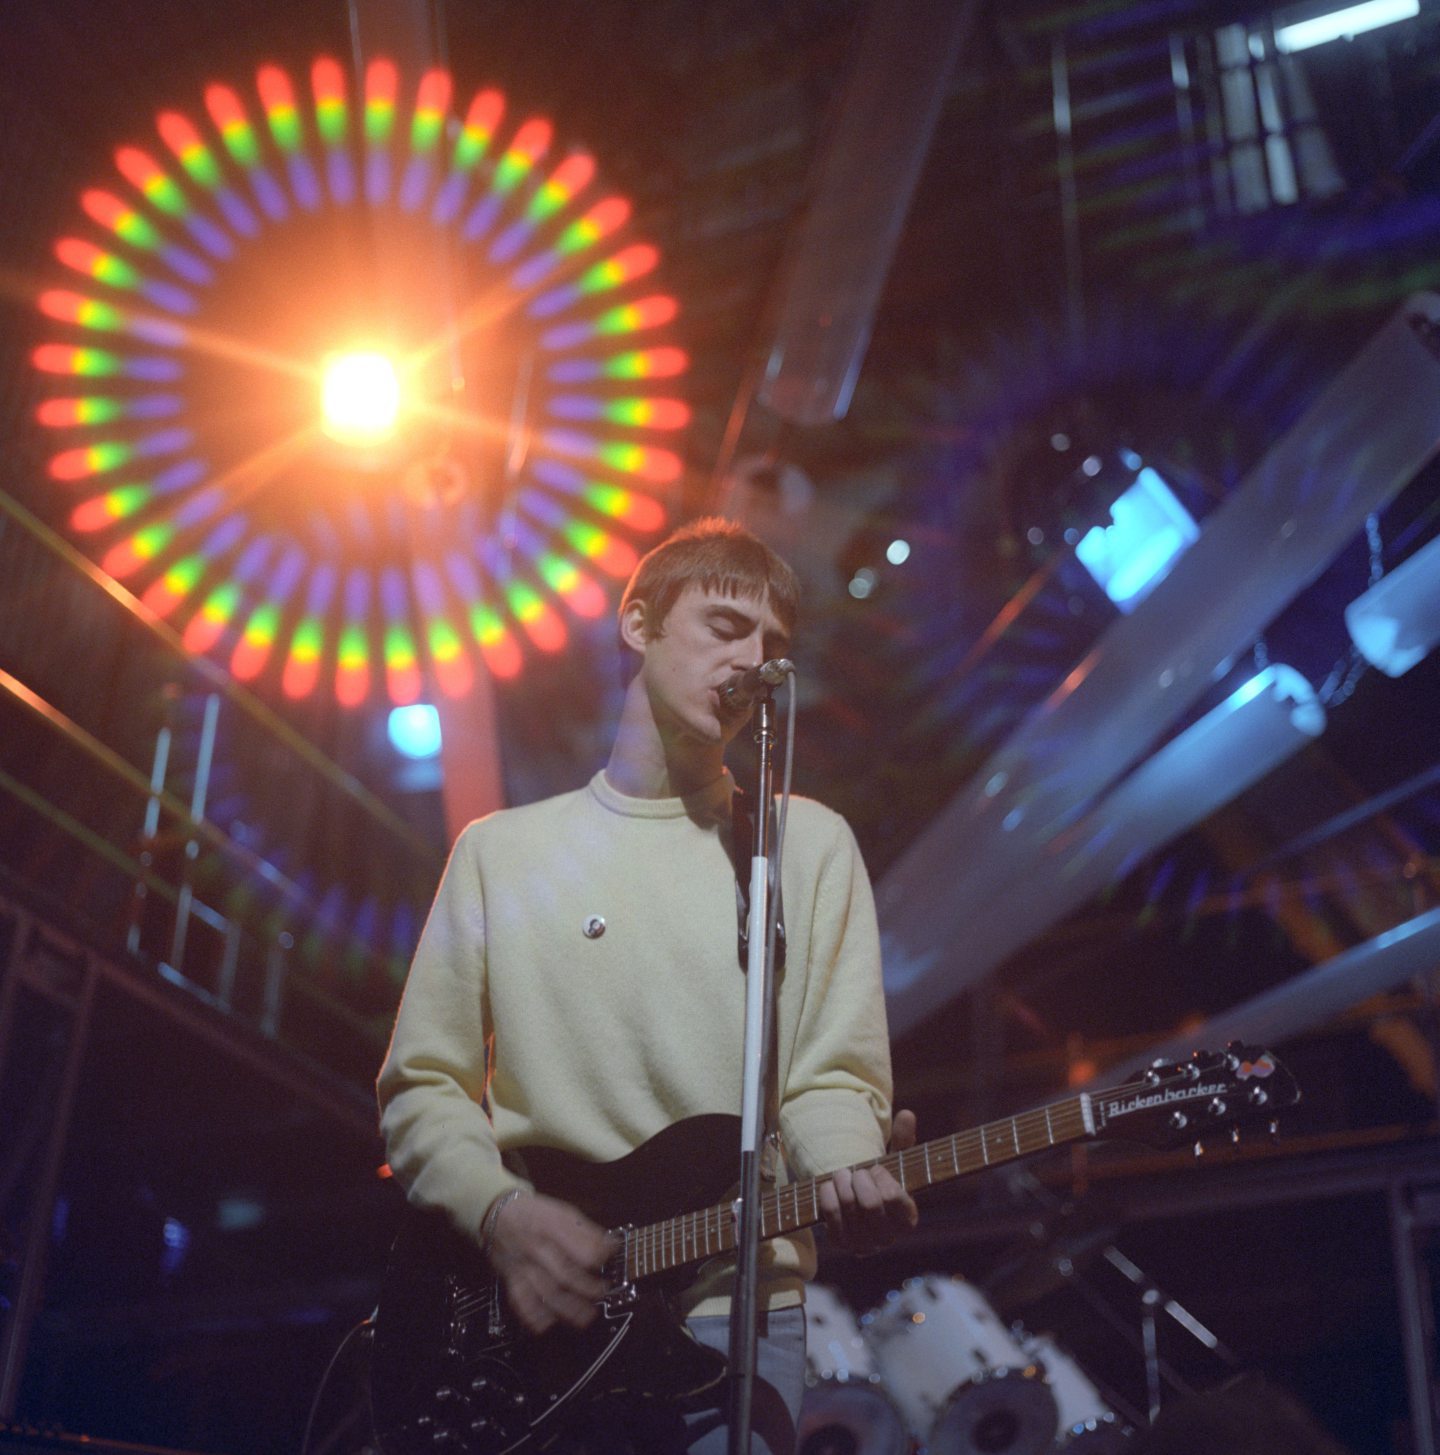 Weller performing with The Jam on TV show The Tube before the split in December 1982. Image: Shutterstock.